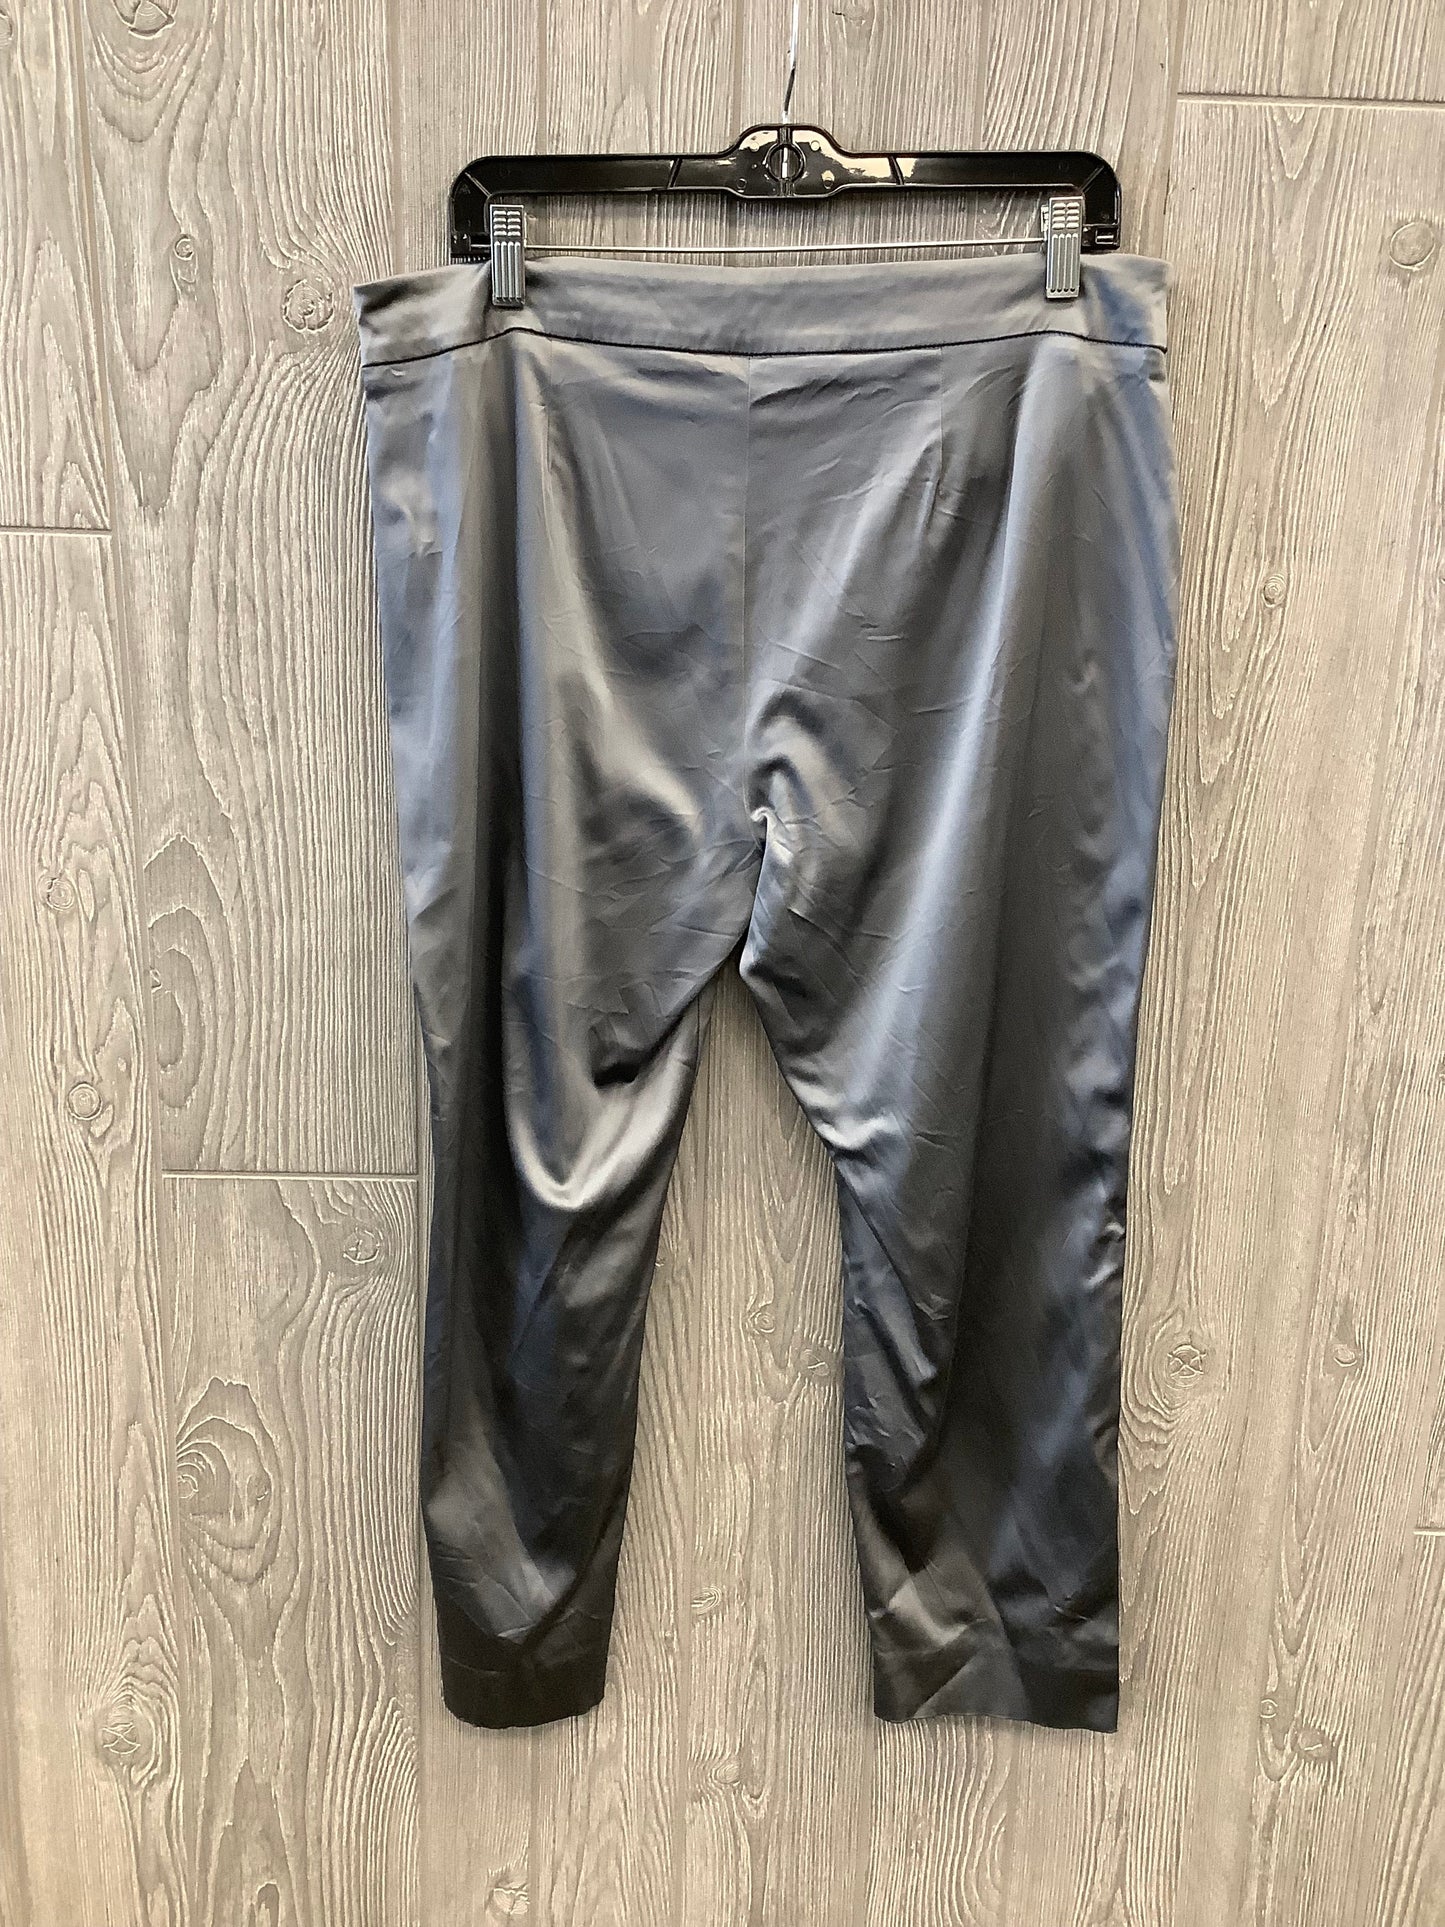 Pants Ankle By Talbots  Size: 14petite